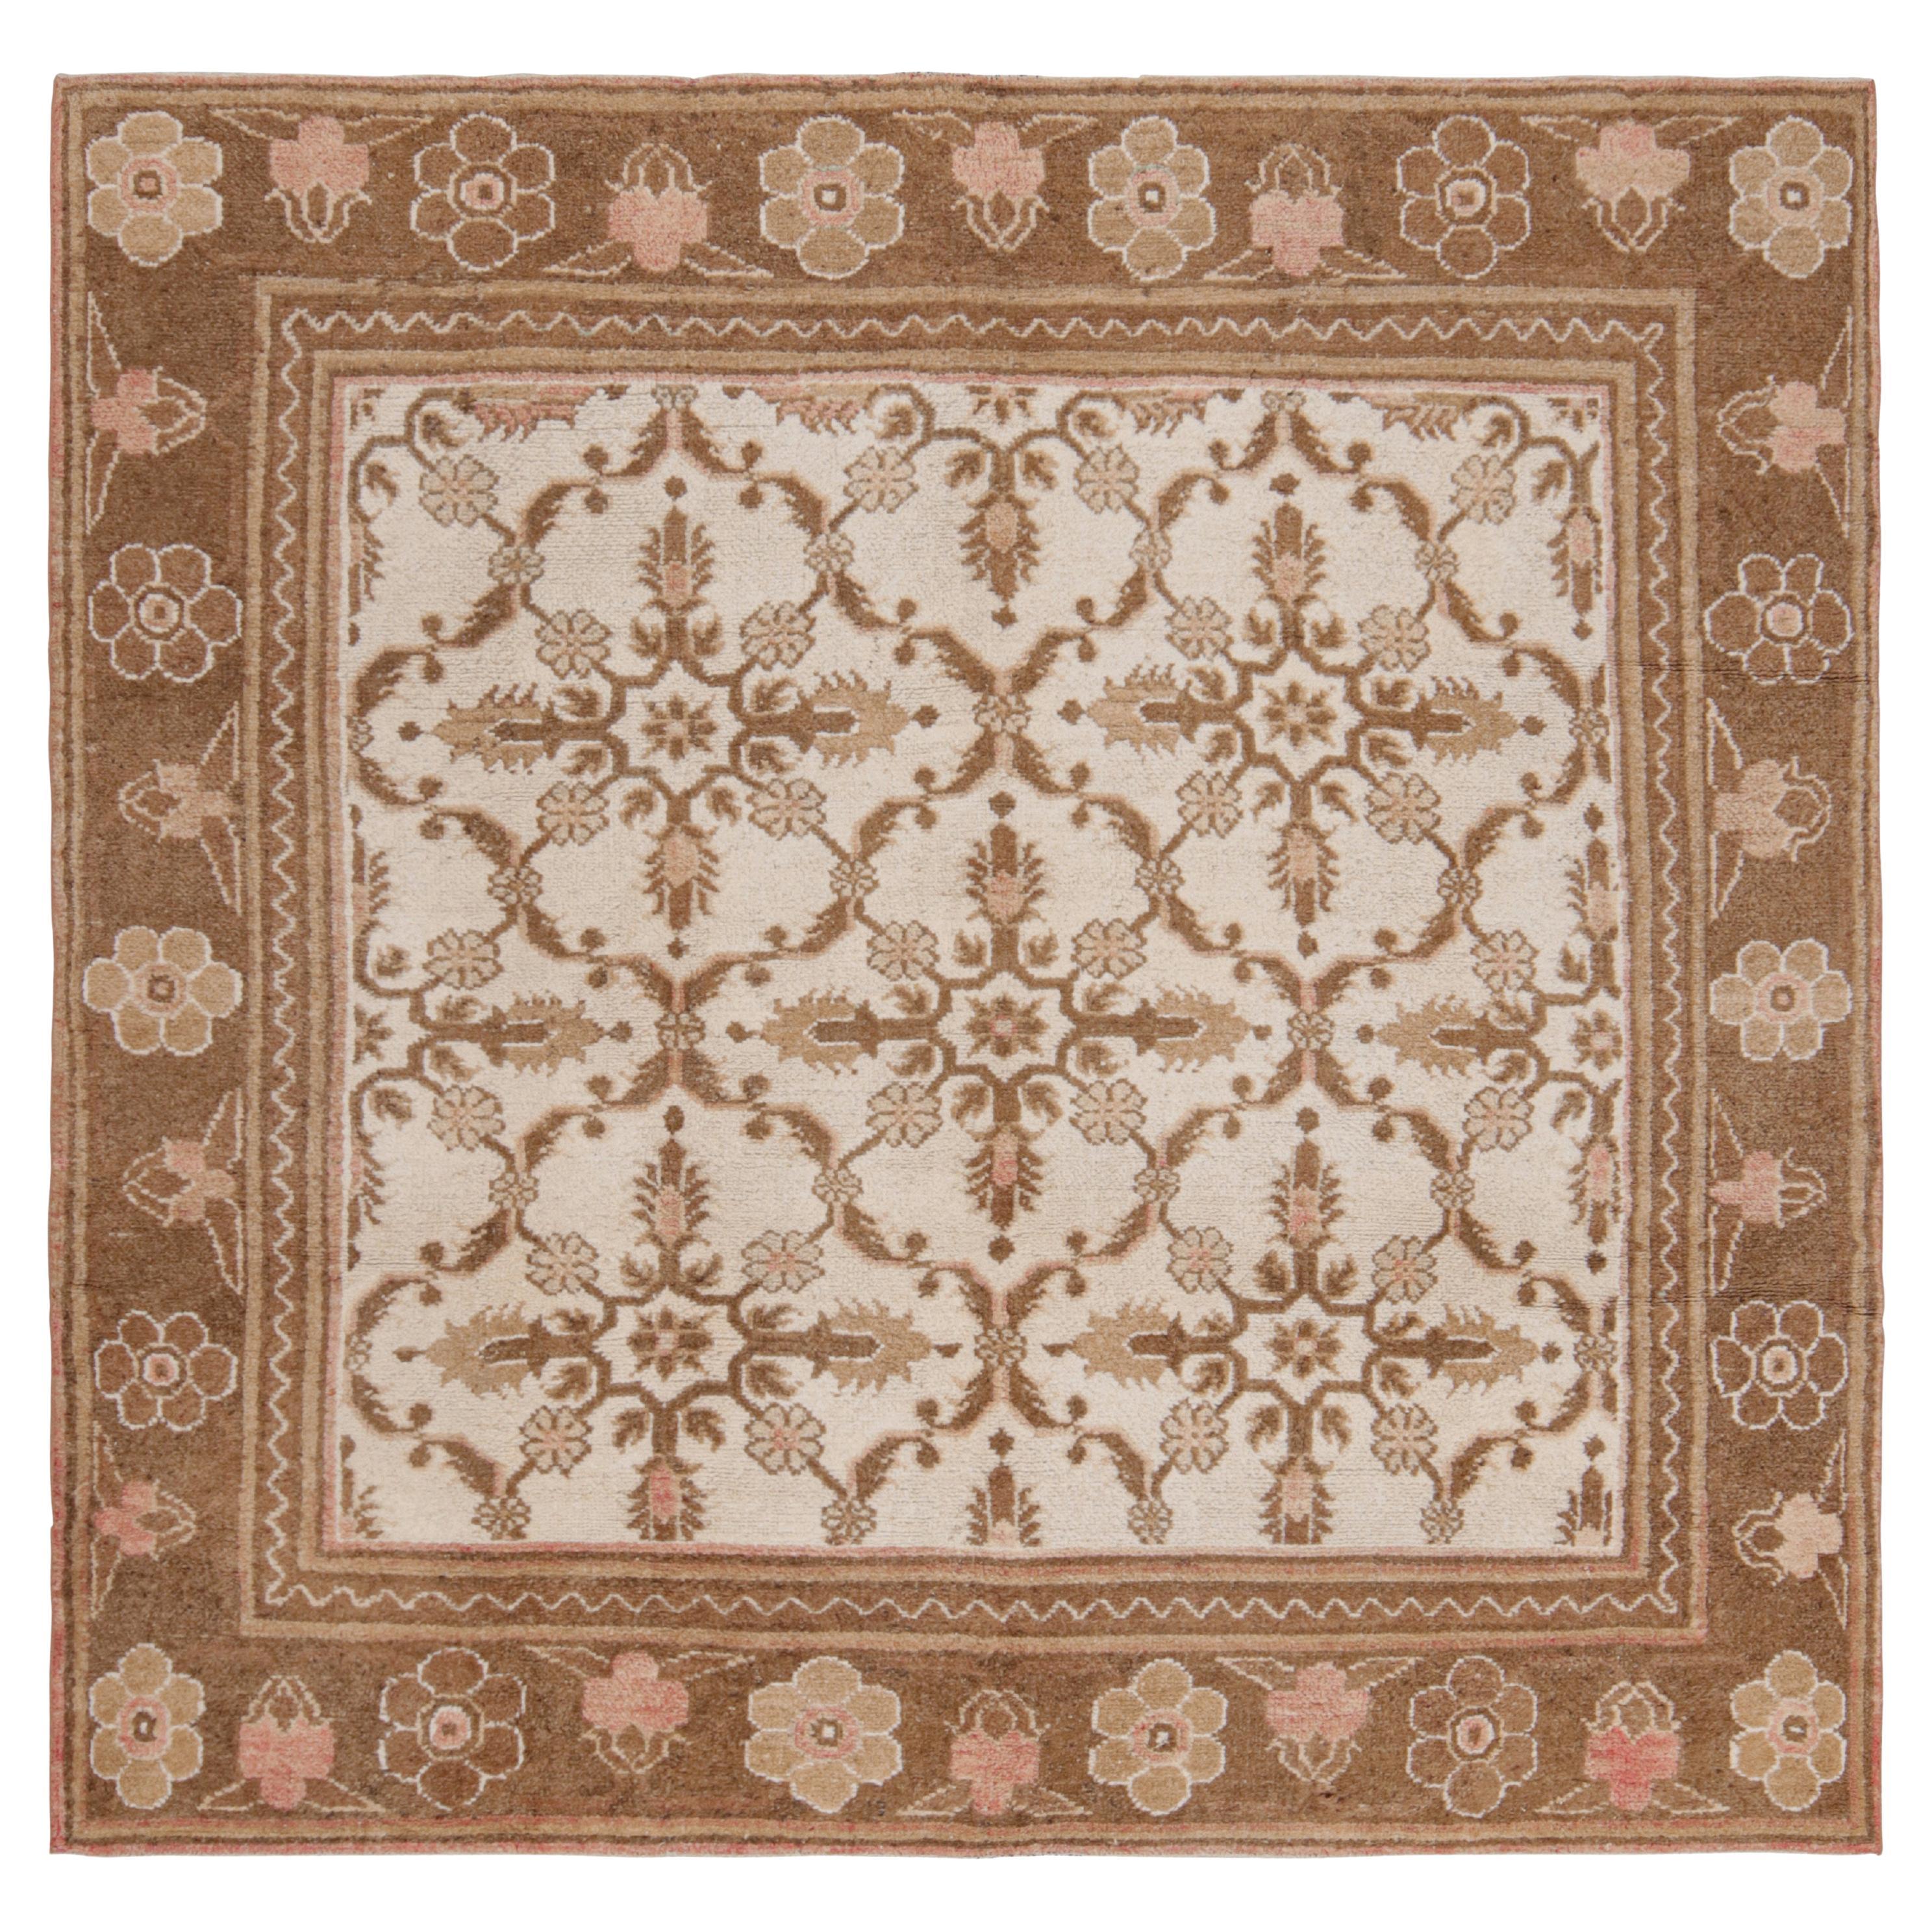 Antique Agra Square Rug in White with Brown and Pink Florals, from Rug & Kilim